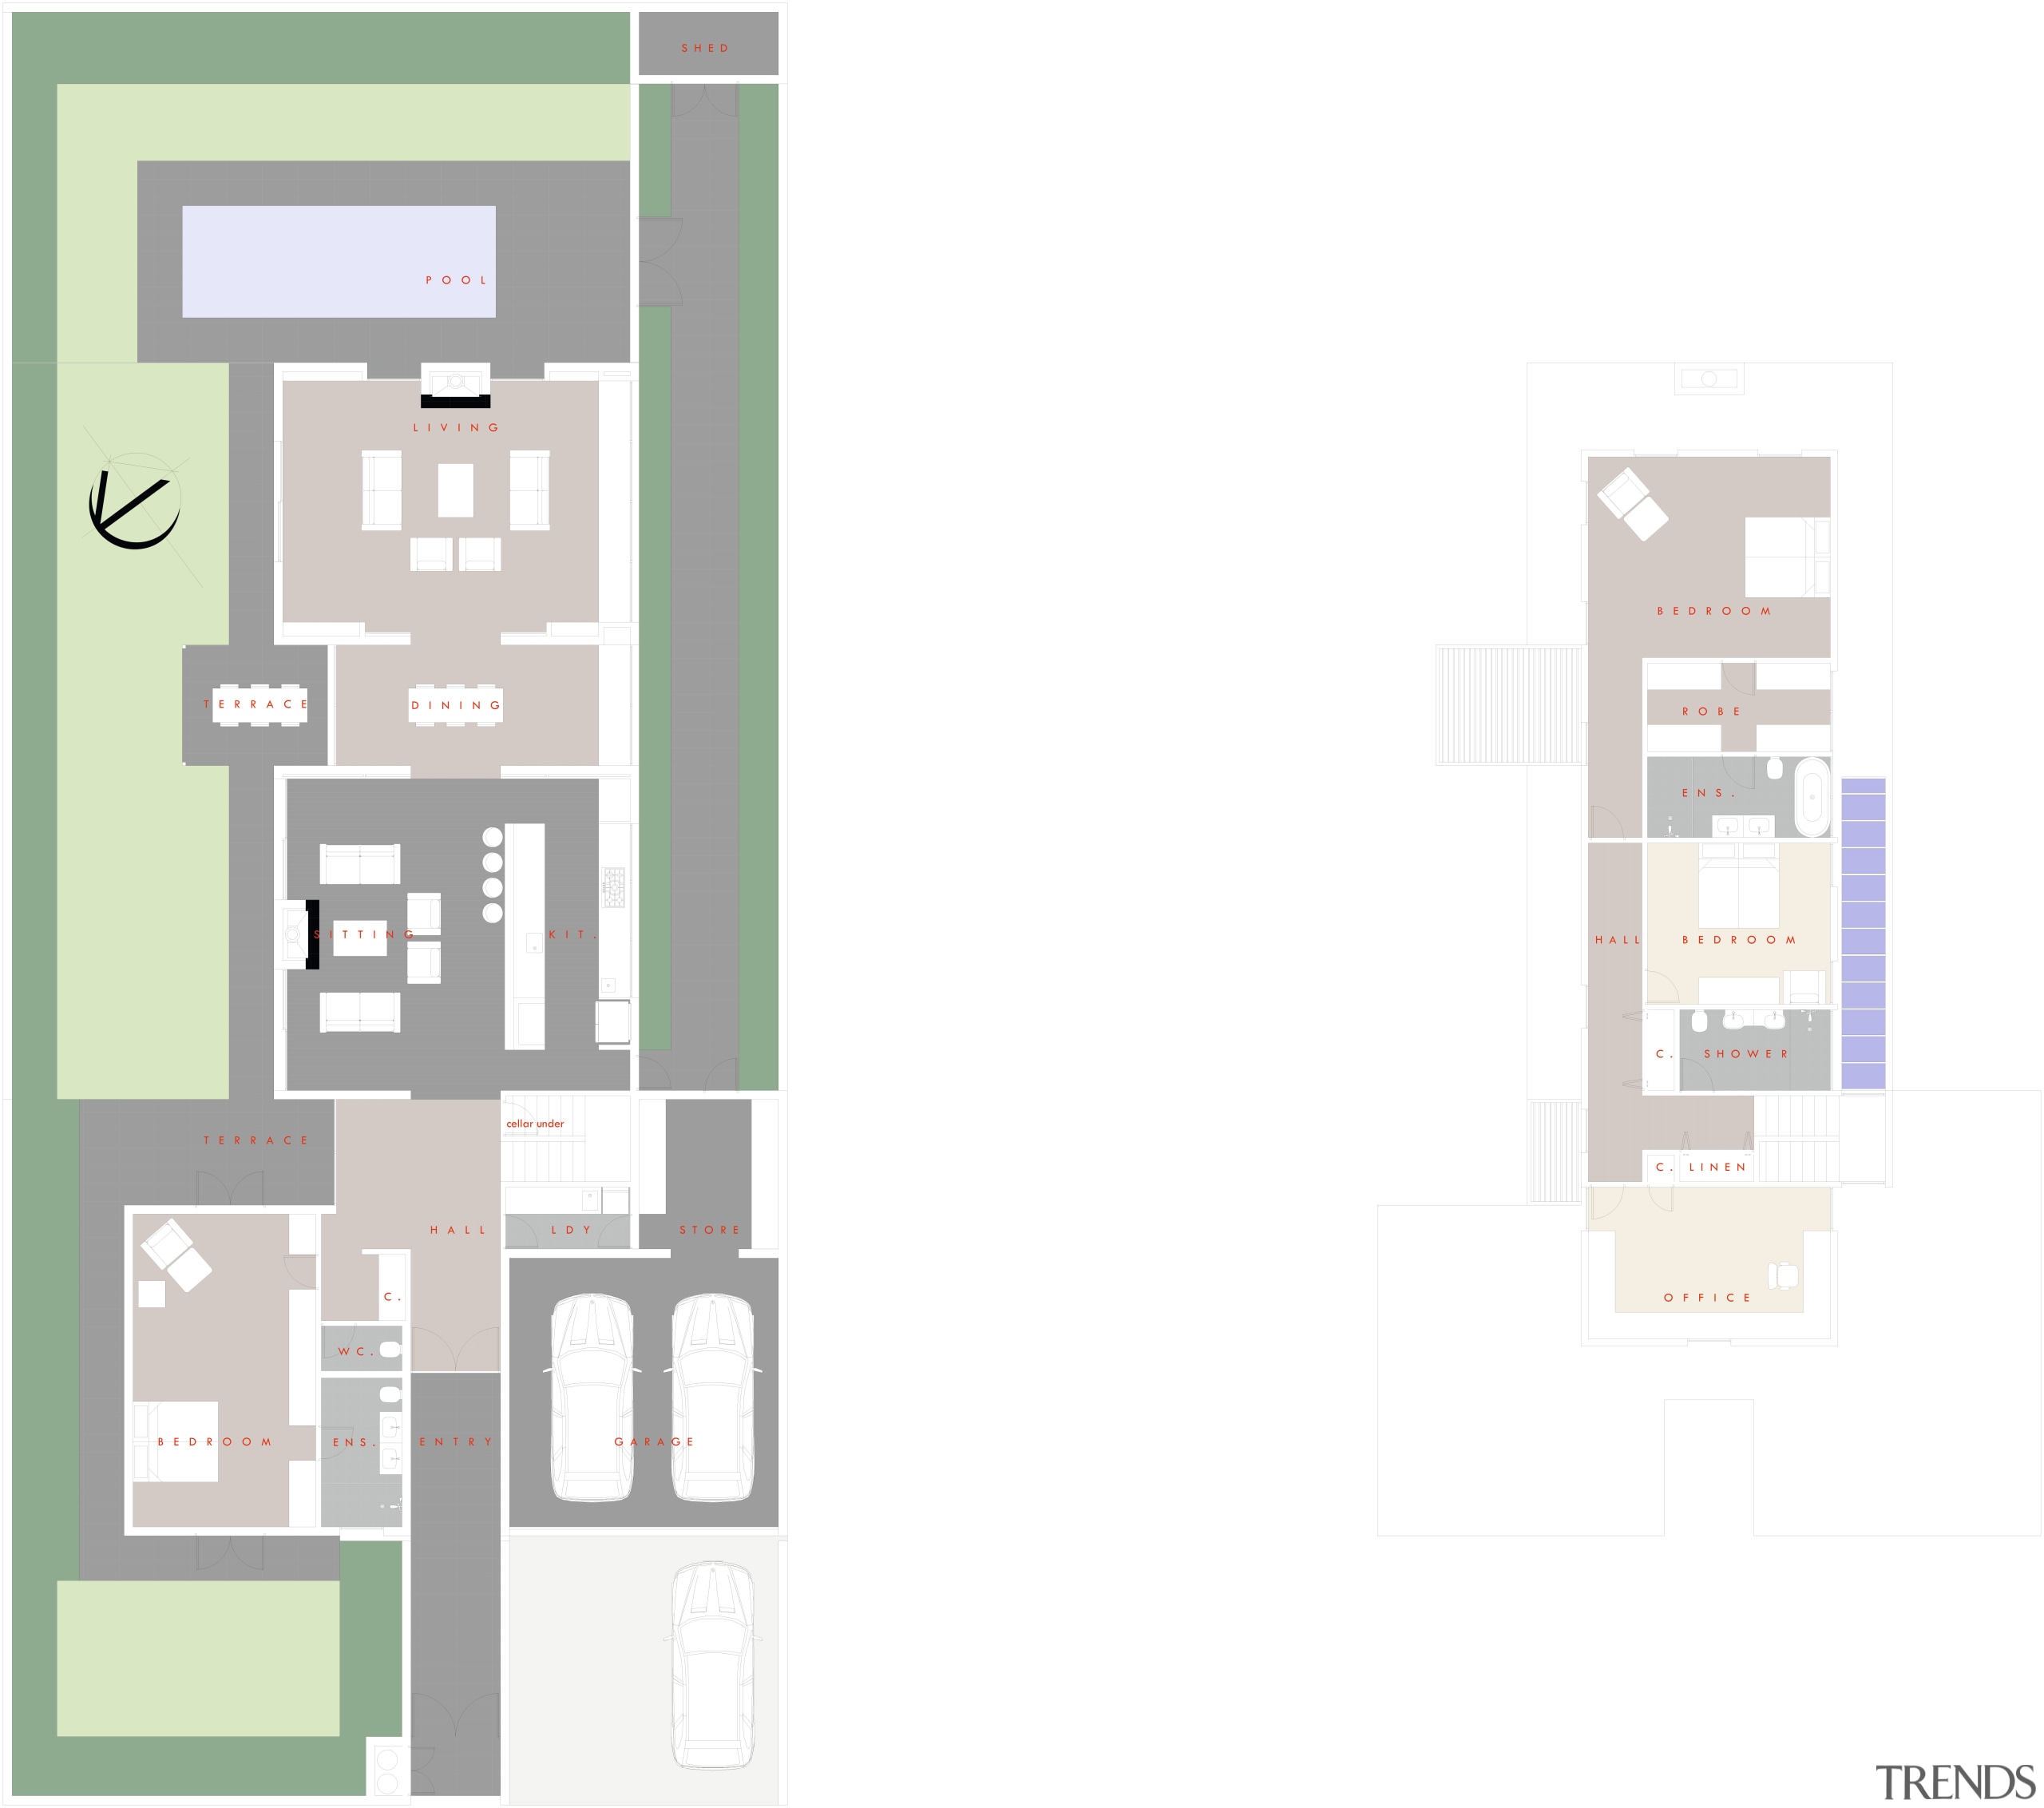 image of plans. - image of plans. - architecture, elevation, floor plan, plan, product design, real estate, white